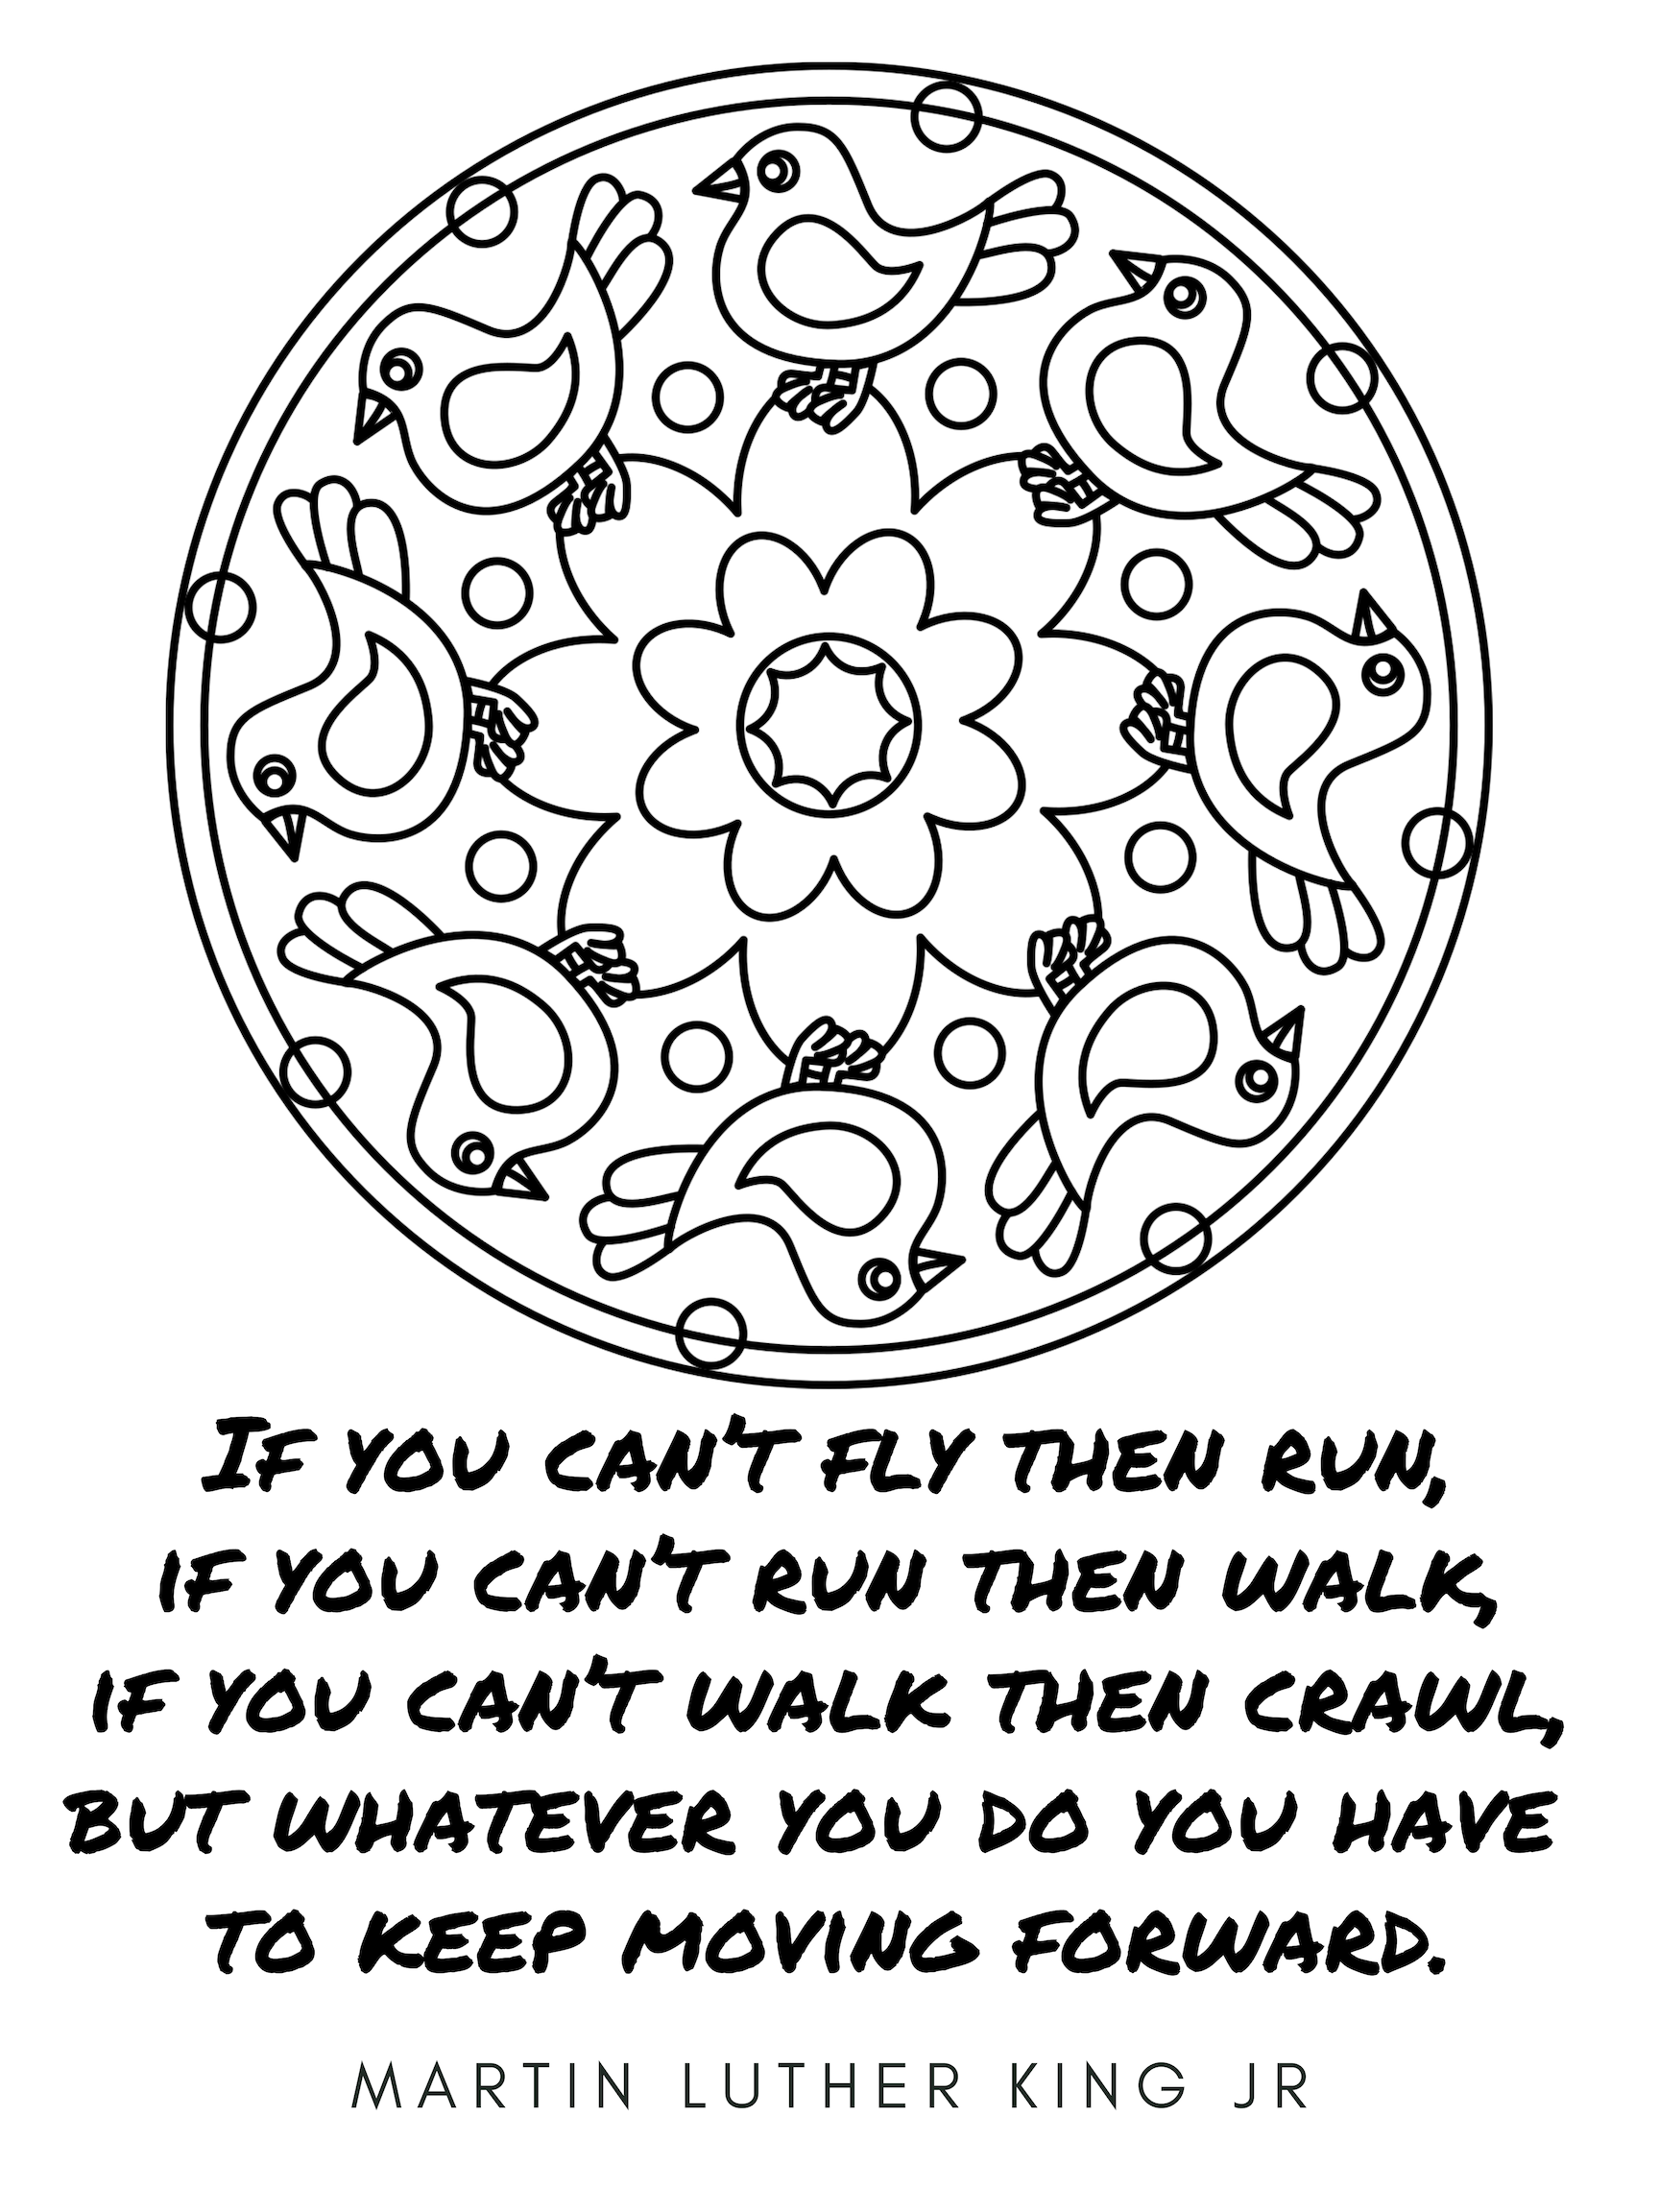 Growth Mindset Coloring Pages, Coloring Sheets, Coloring Posters